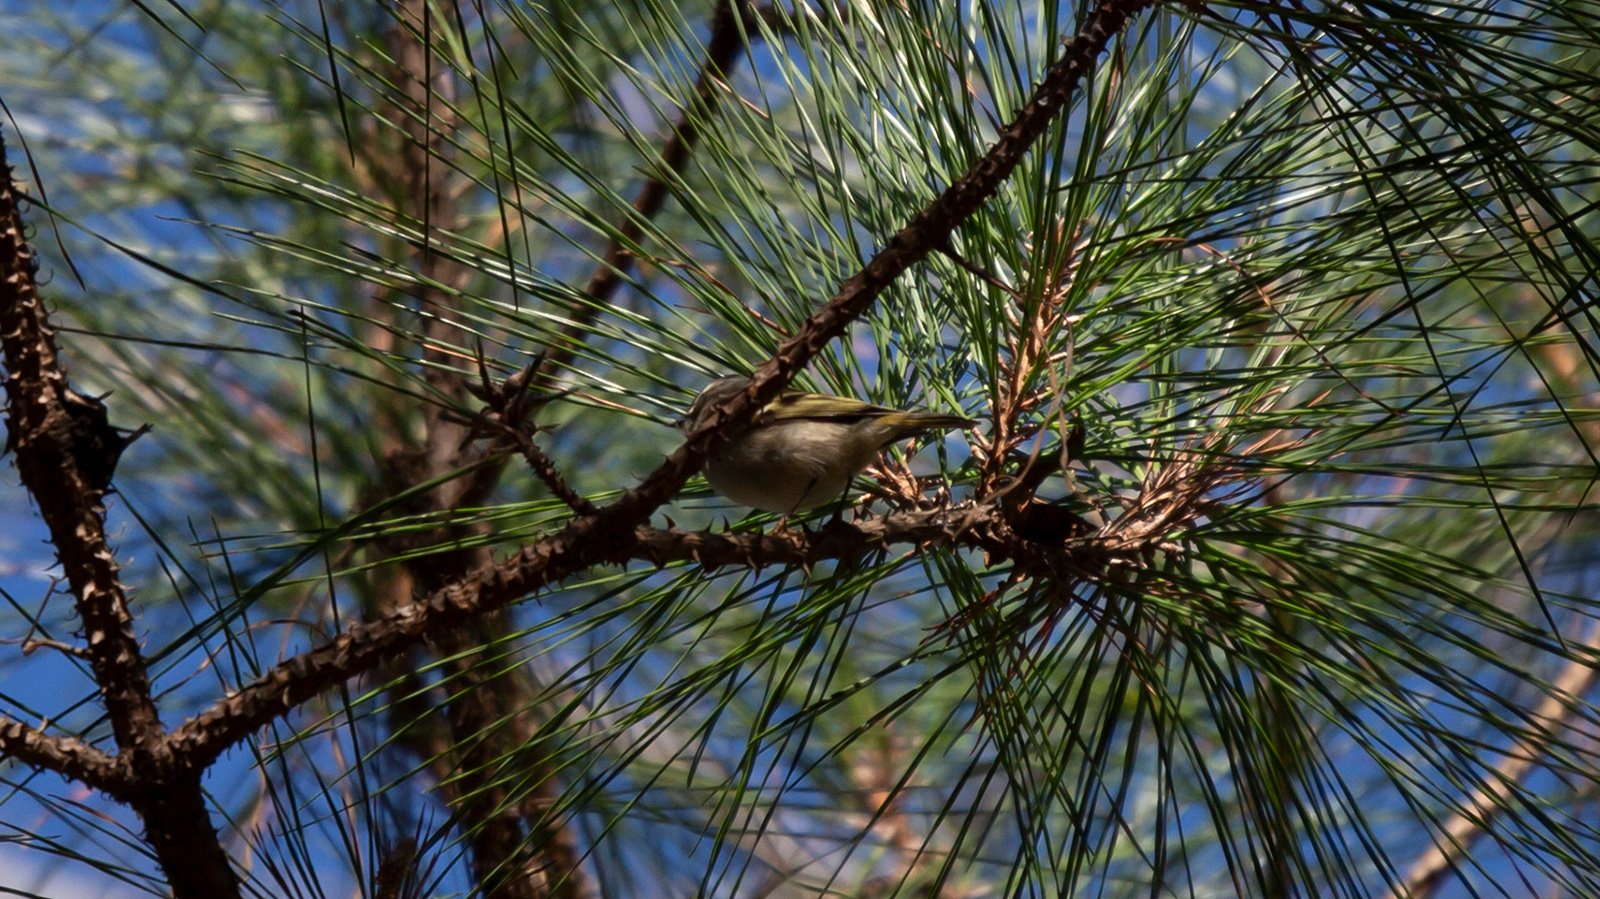 Golden-crowned kinglet standing on a limb